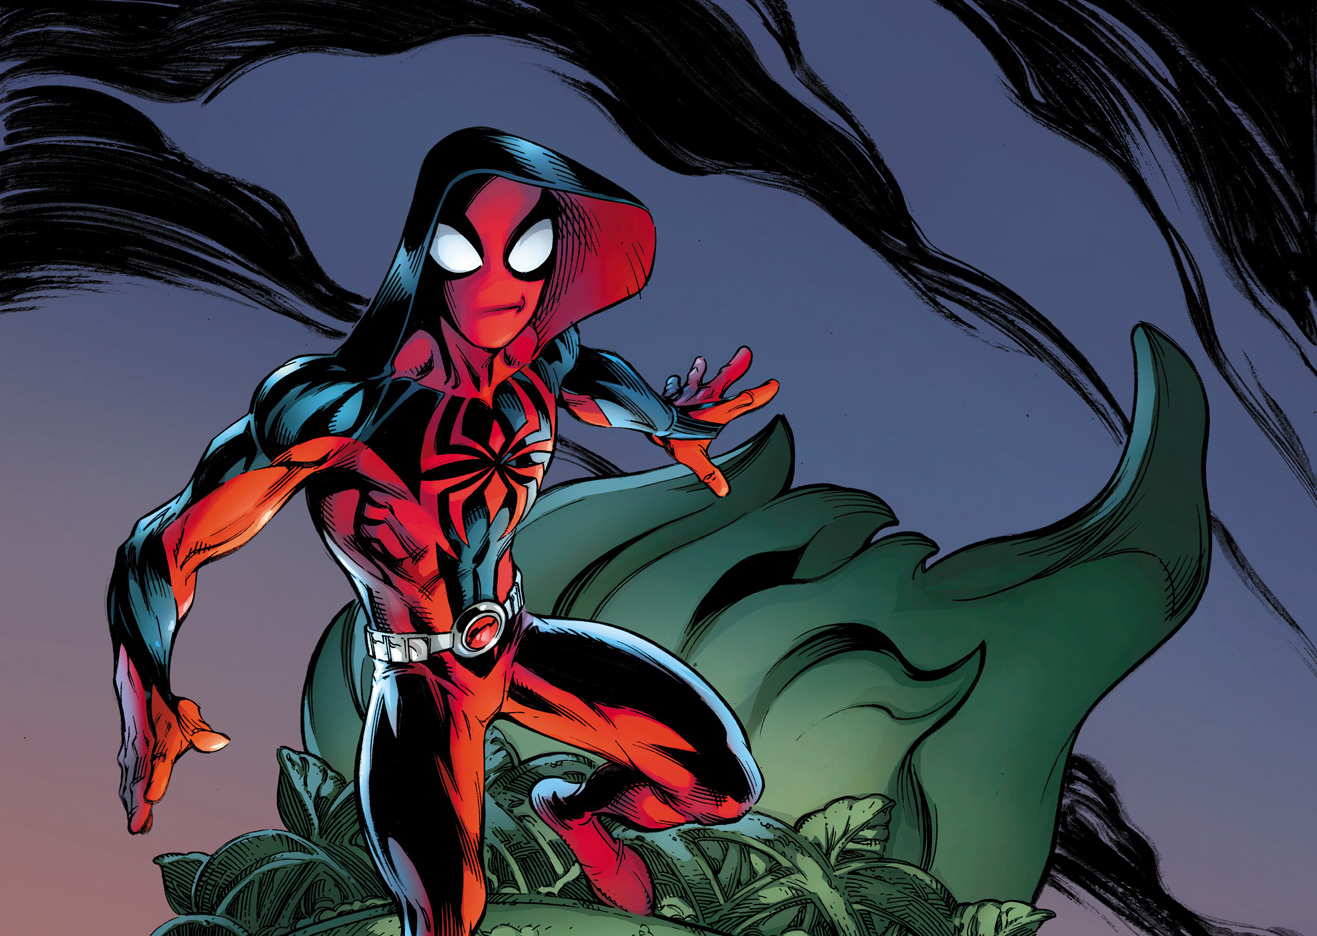 Marvel Preview: Ben Reilly: The Scarlet Spider #1